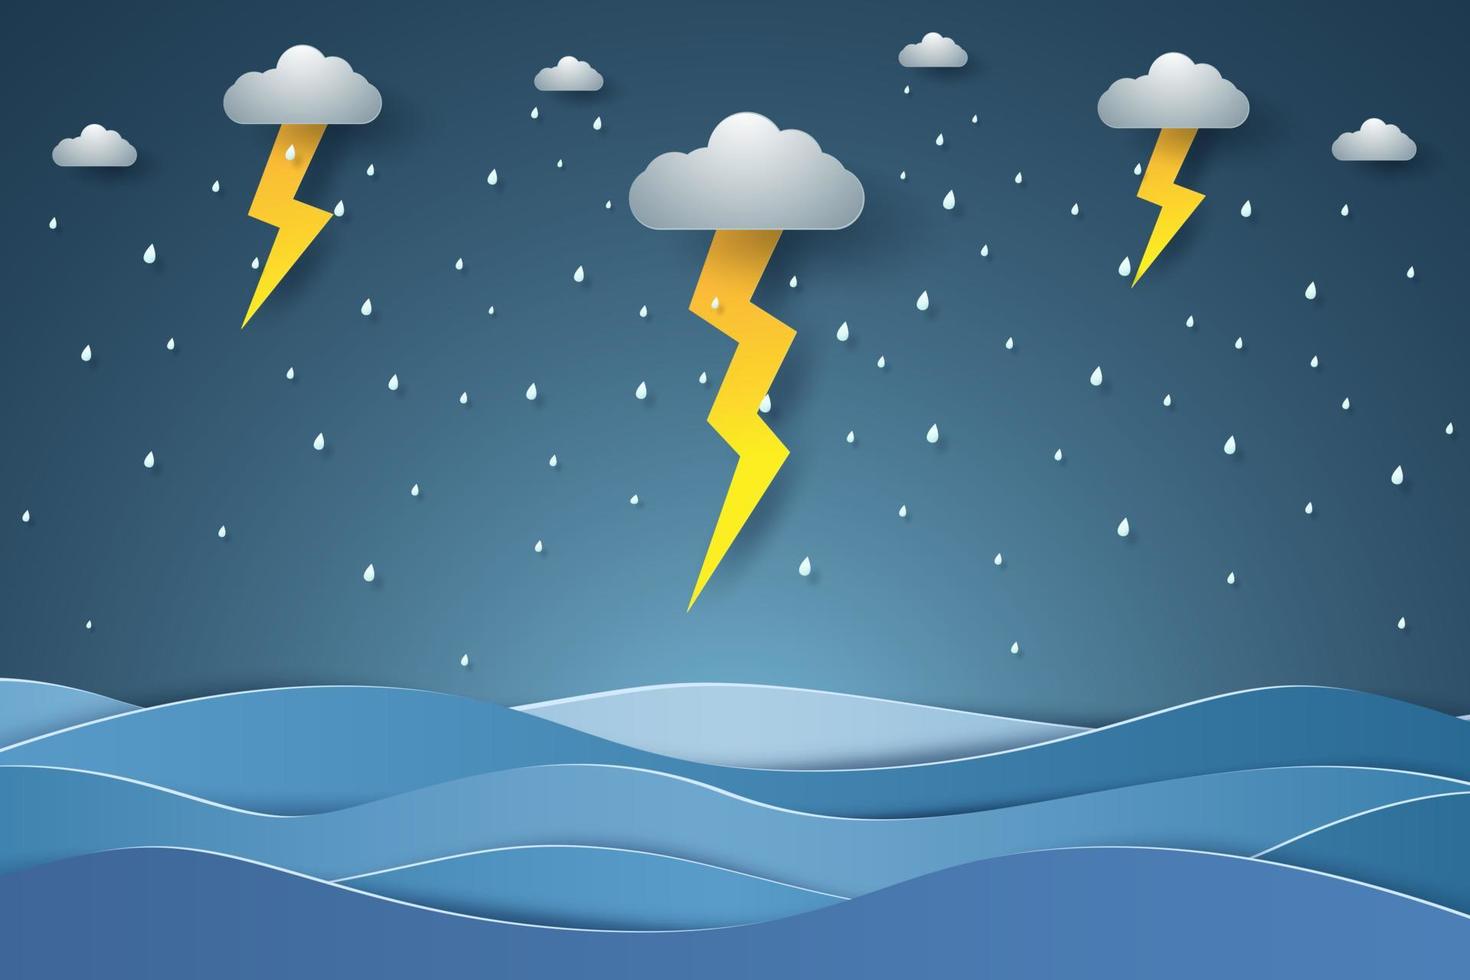 Seascape , Rain in sea with lightning , paper art style vector